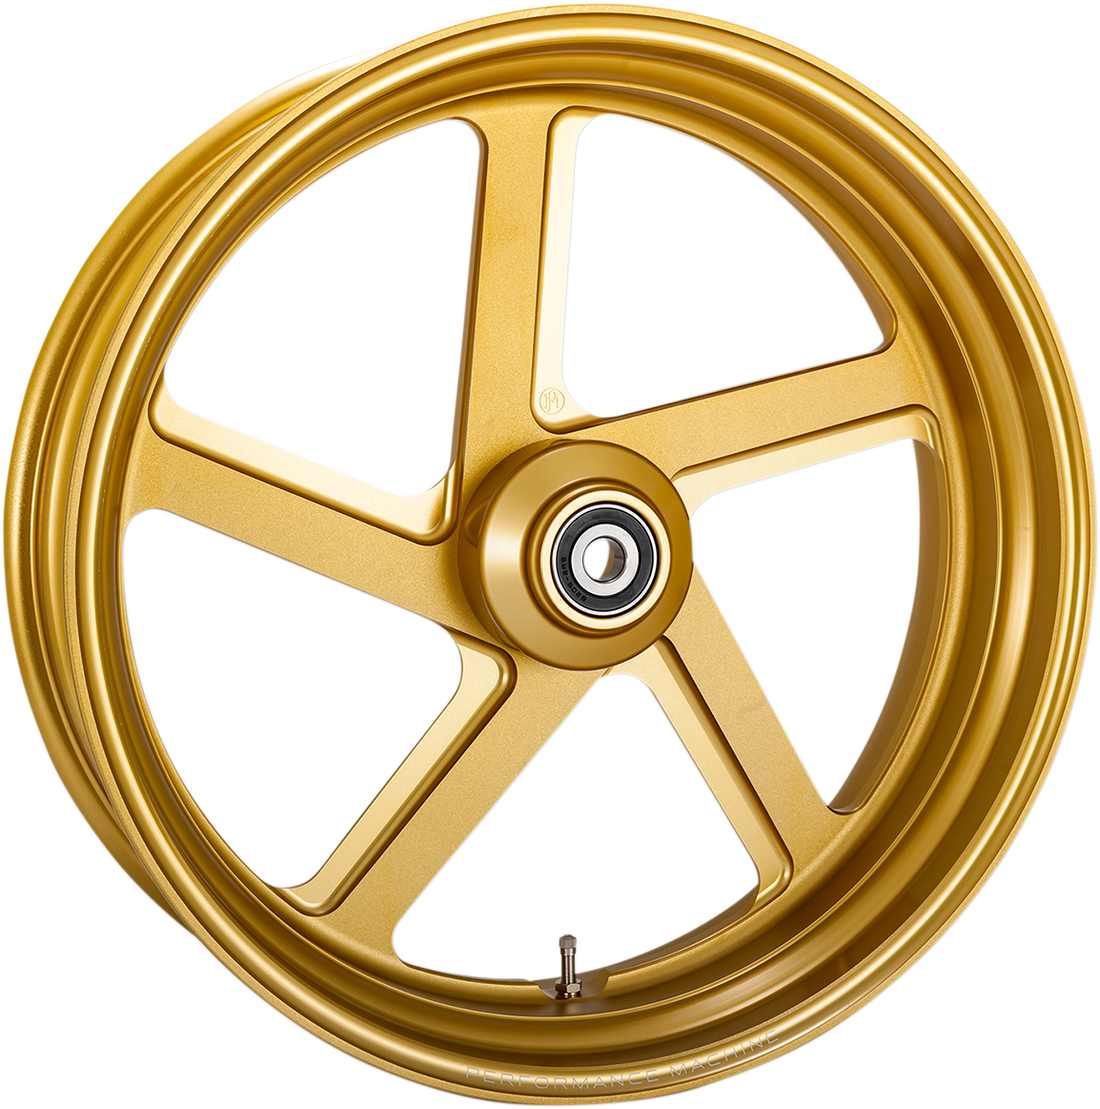 0202-2162 - PERFORMANCE MACHINE (PM) Wheel - Pro-Am - Single Disc - Rear - Gold Ops* - 18"x5.50" - ABS 12697814RPROSMG